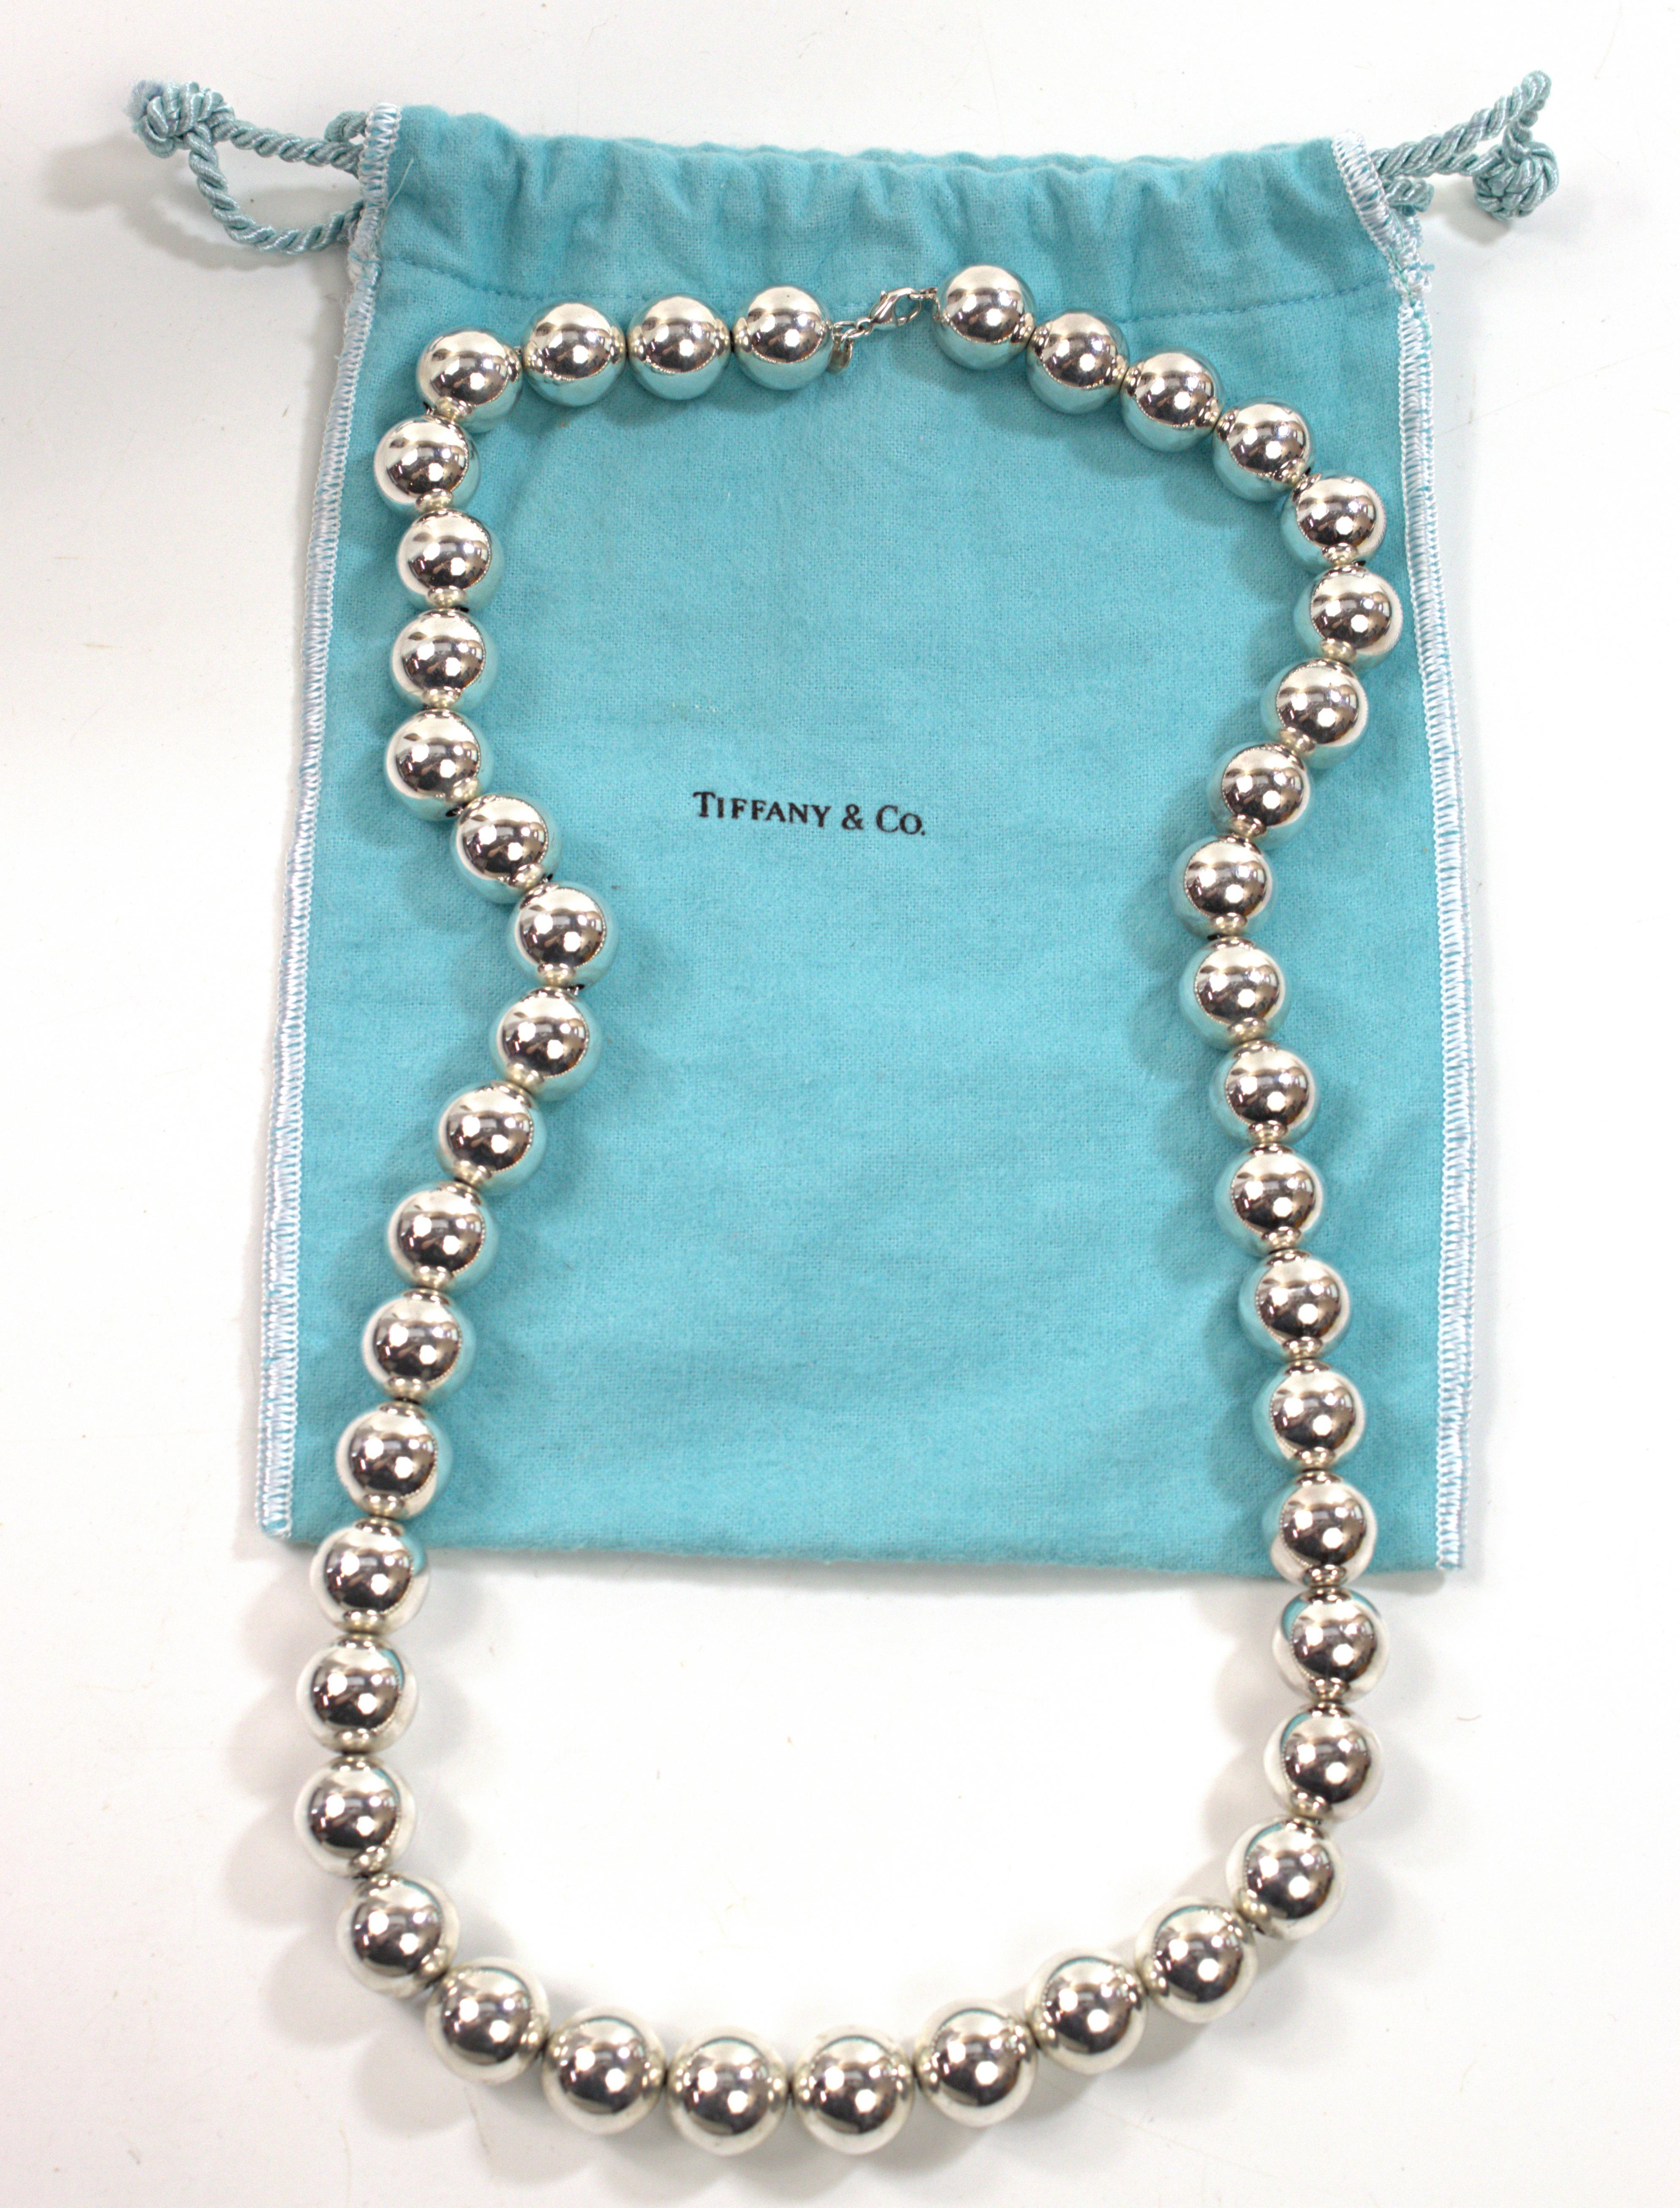 Tiffany & Co. Sterling Silver Ball Bead Necklace In Good Condition For Sale In Pleasant Hill, CA